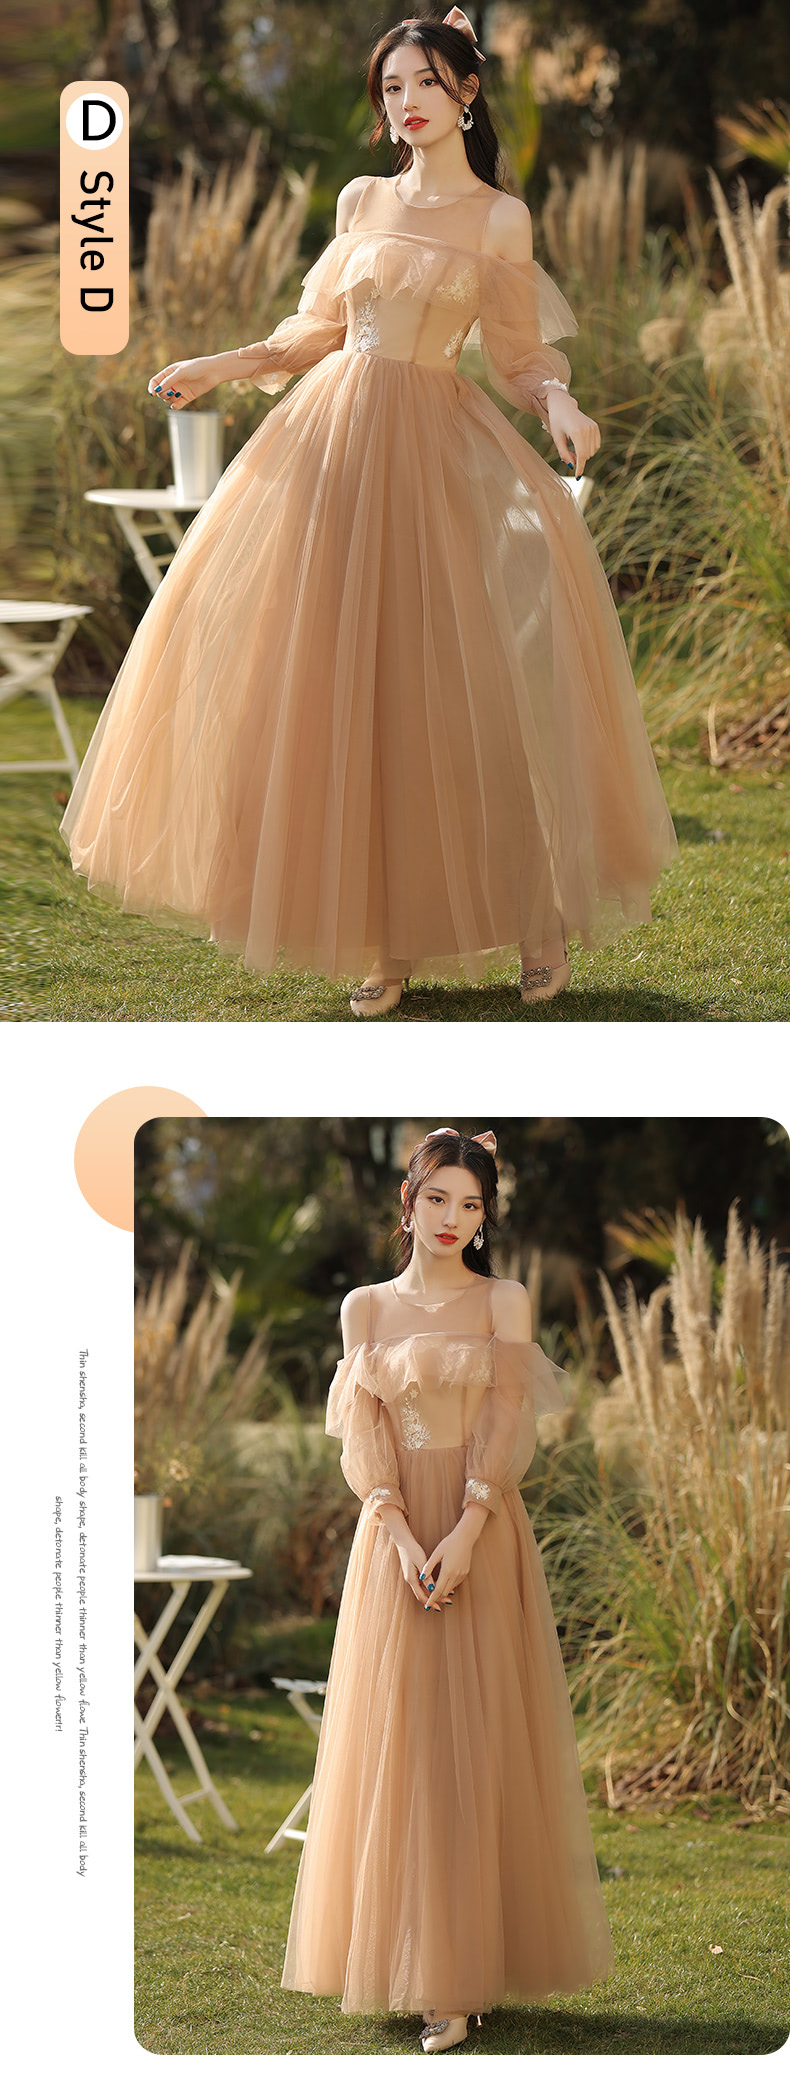 Fairy-Champagne-Bridesmaid-Long-Dress-Sweet-Evening-Formal-Gown20.jpg